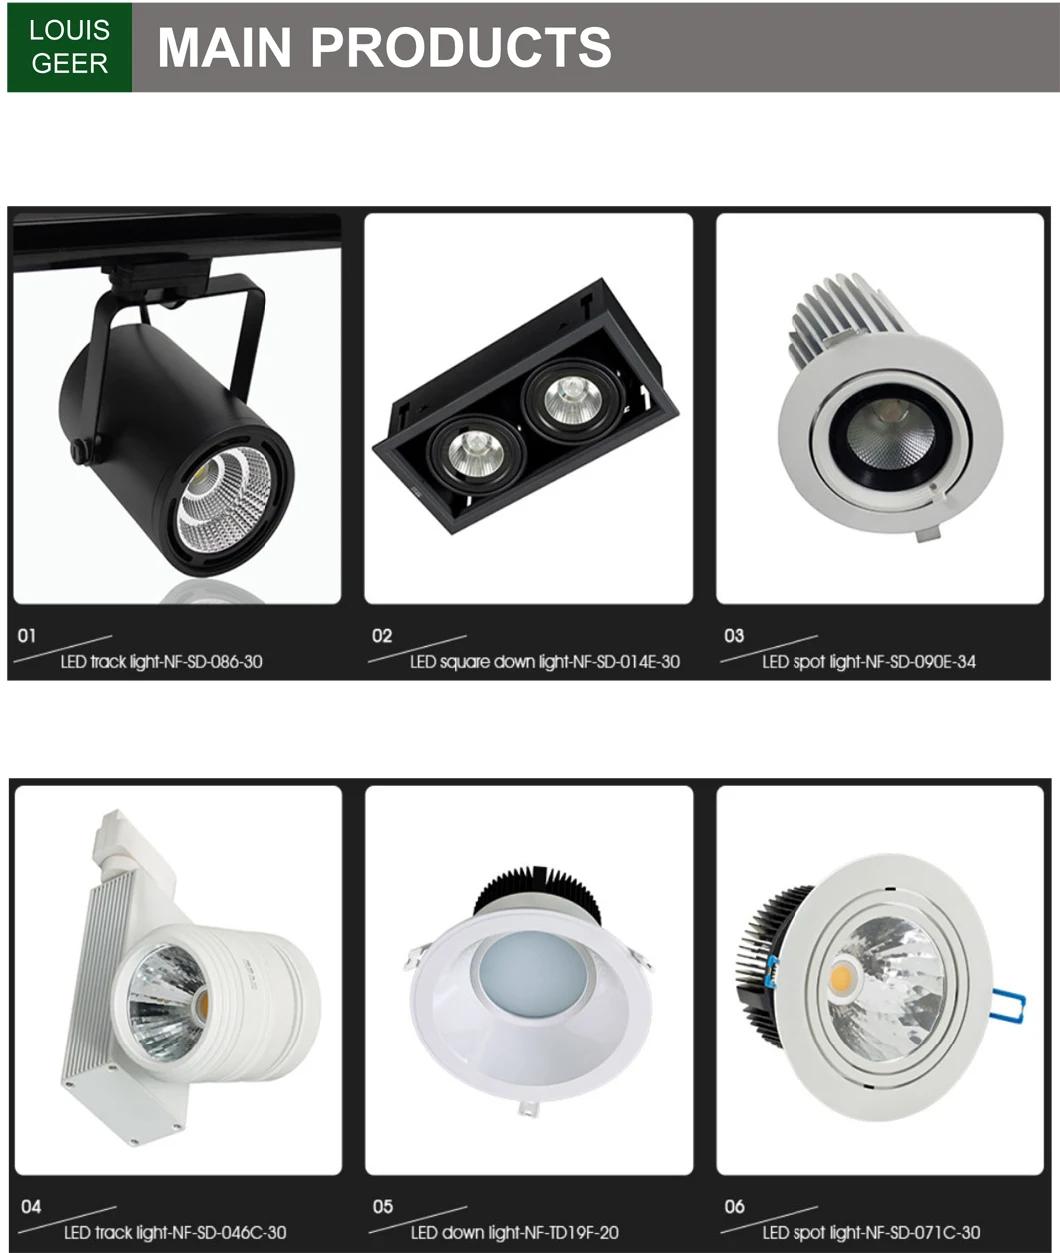 Commercial Adjustable Recessed LED Down Light Housing 7W 12W 20W 30W 40W Aluminum COB Empty Downlight